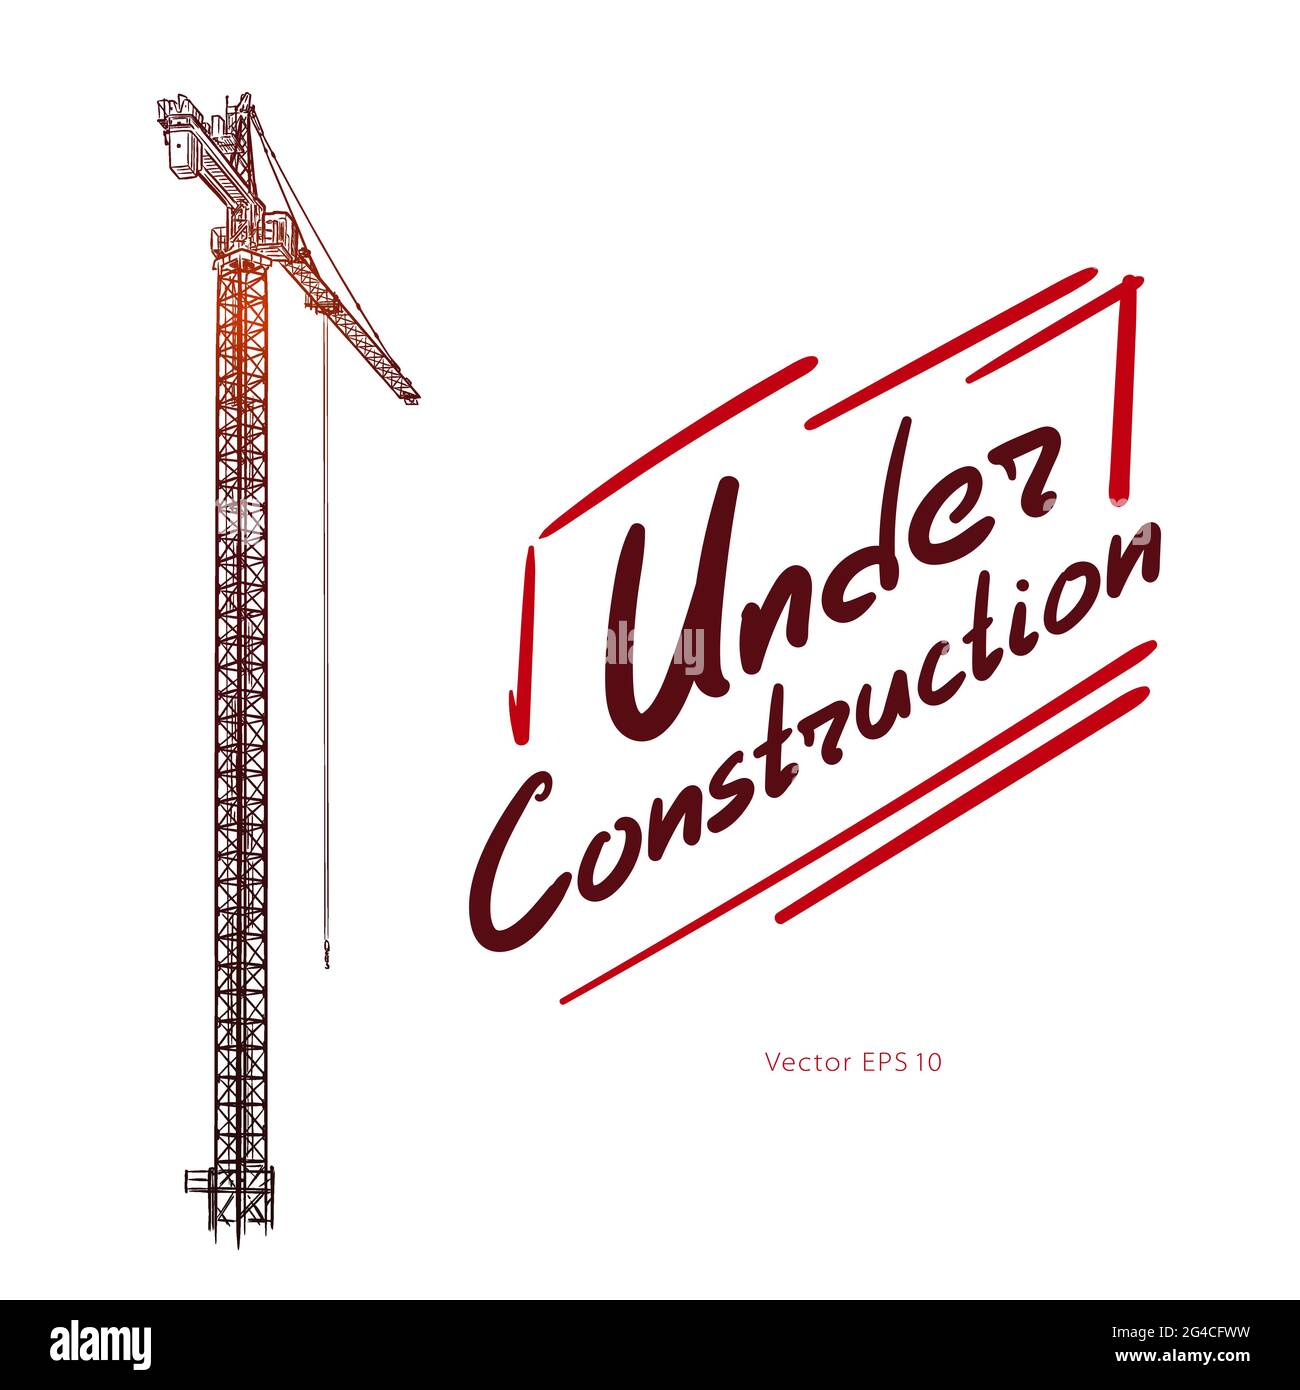 Tower construction crane. Hand drawn vector illustration isolated on white background. Stock Vector